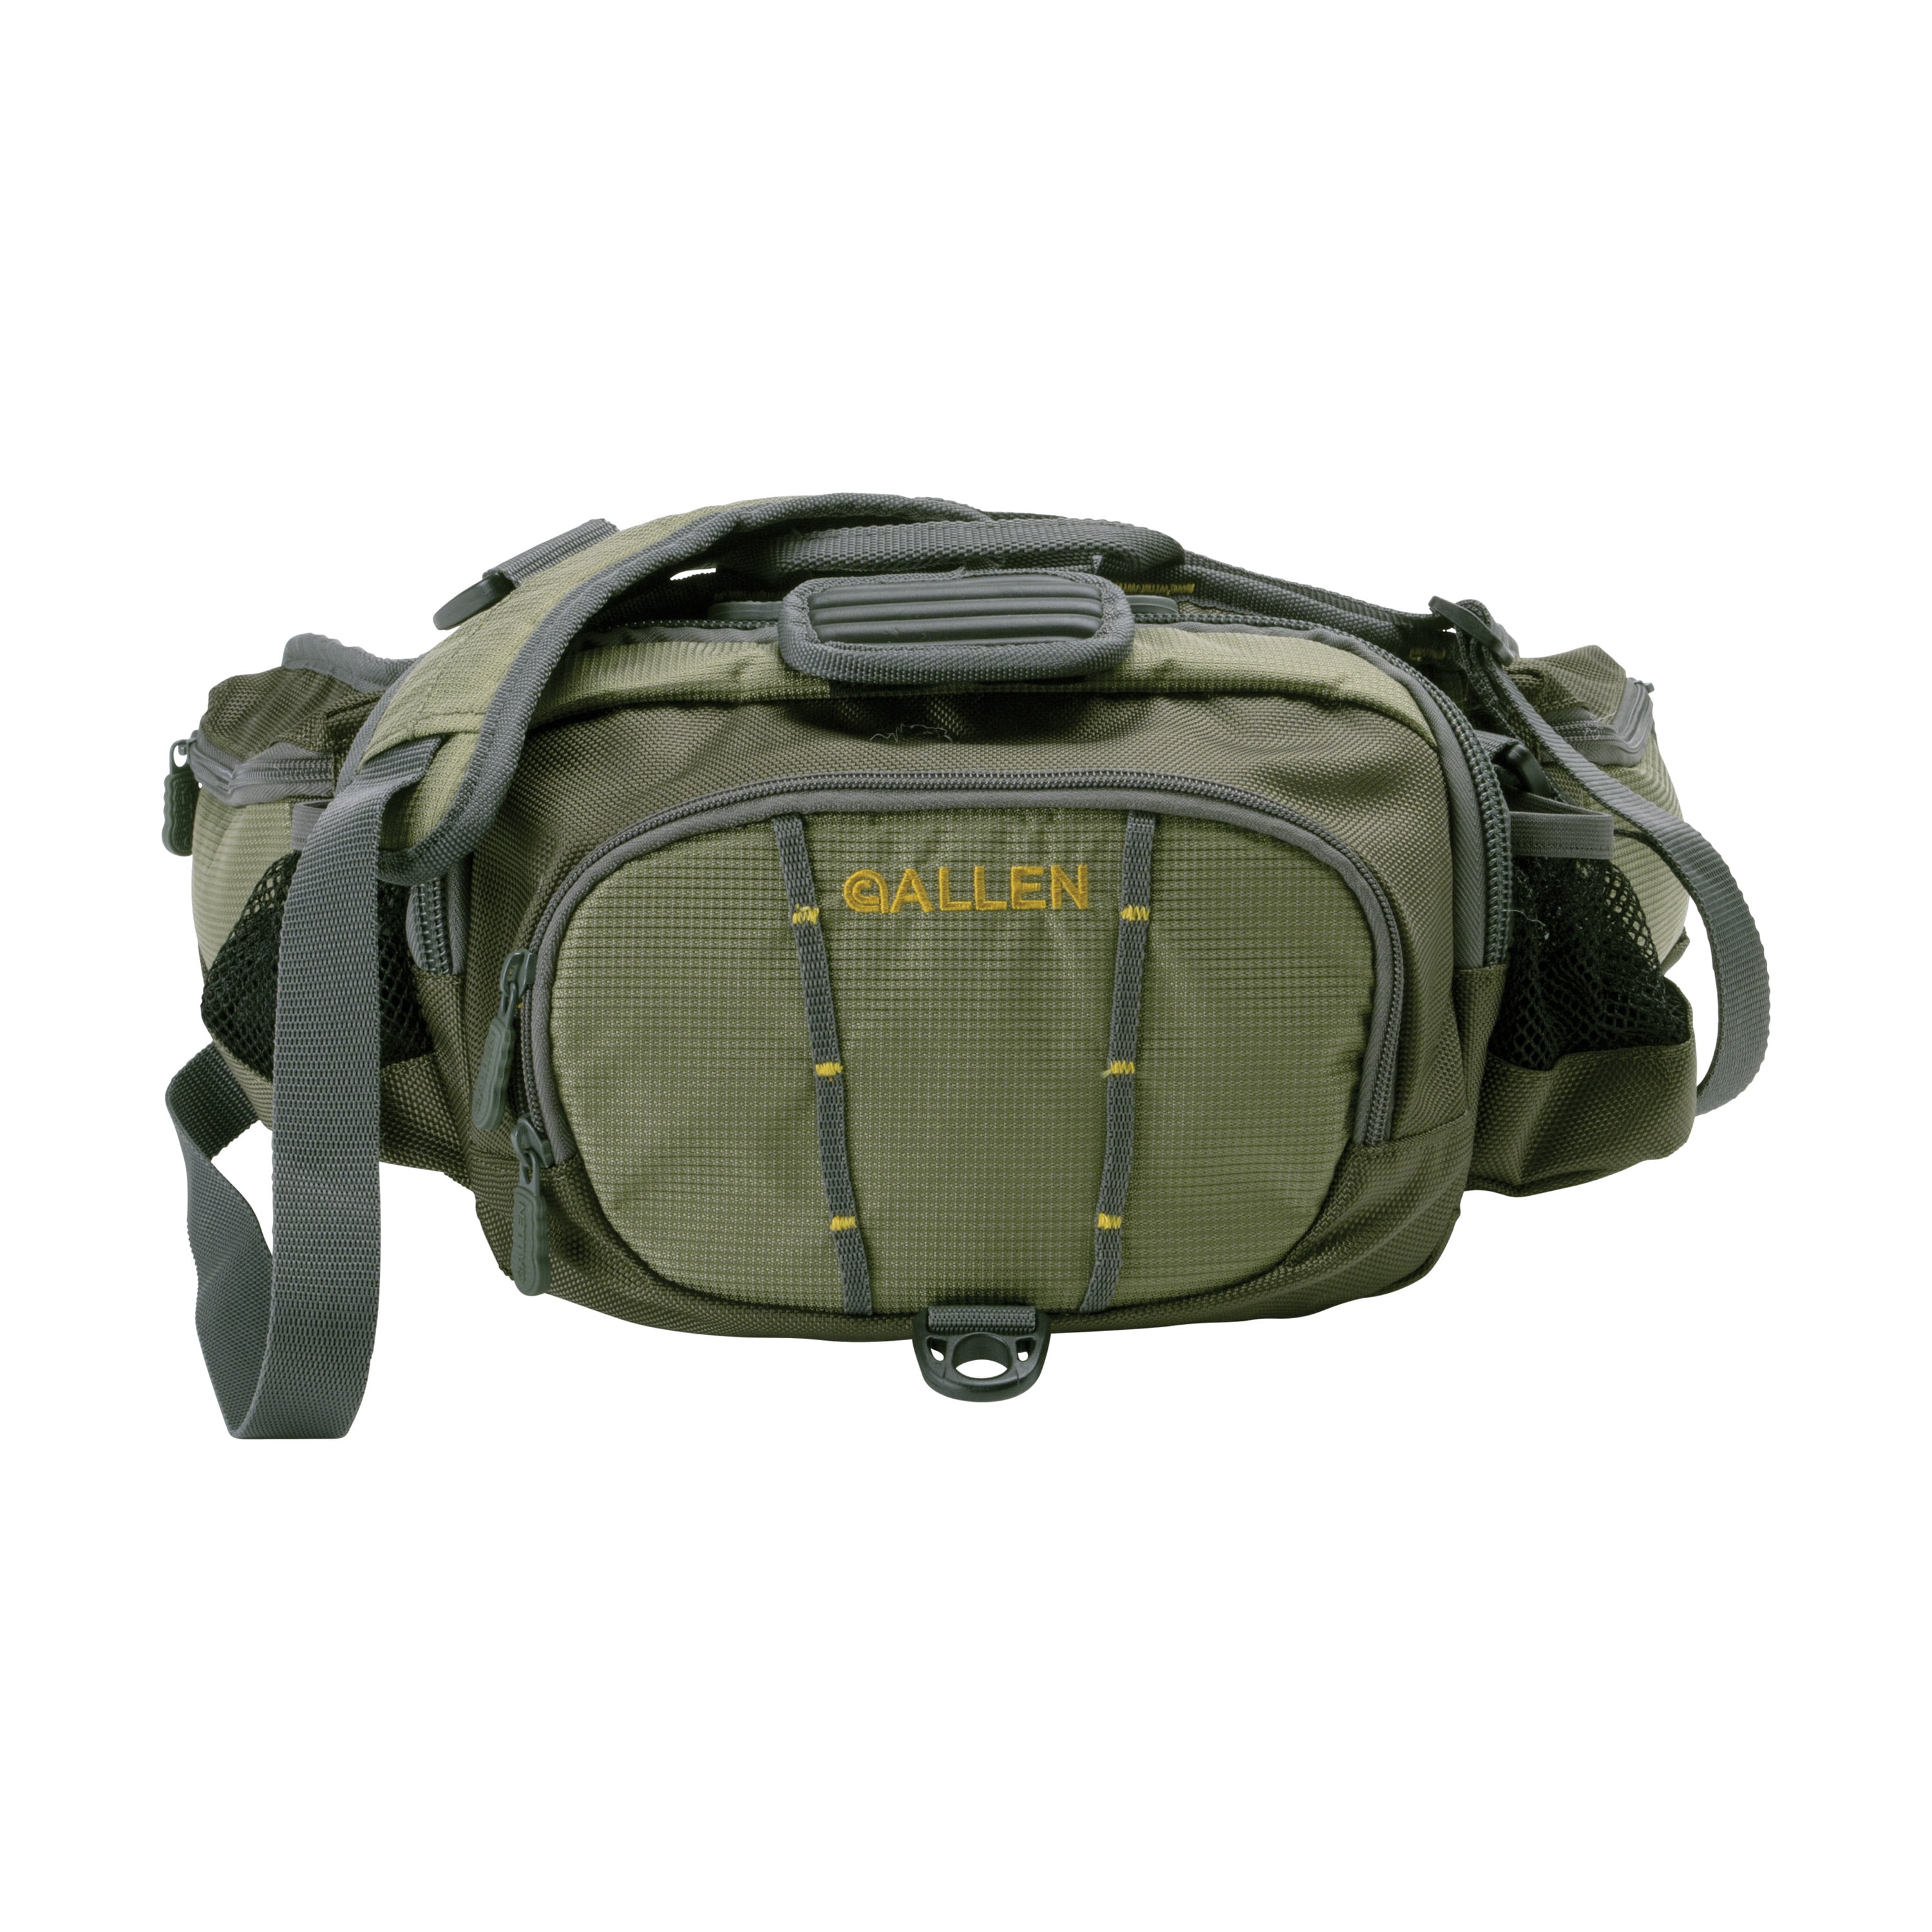 Allen Company Eagle River Lumbar Fly Fishing Pack, Olive Green 